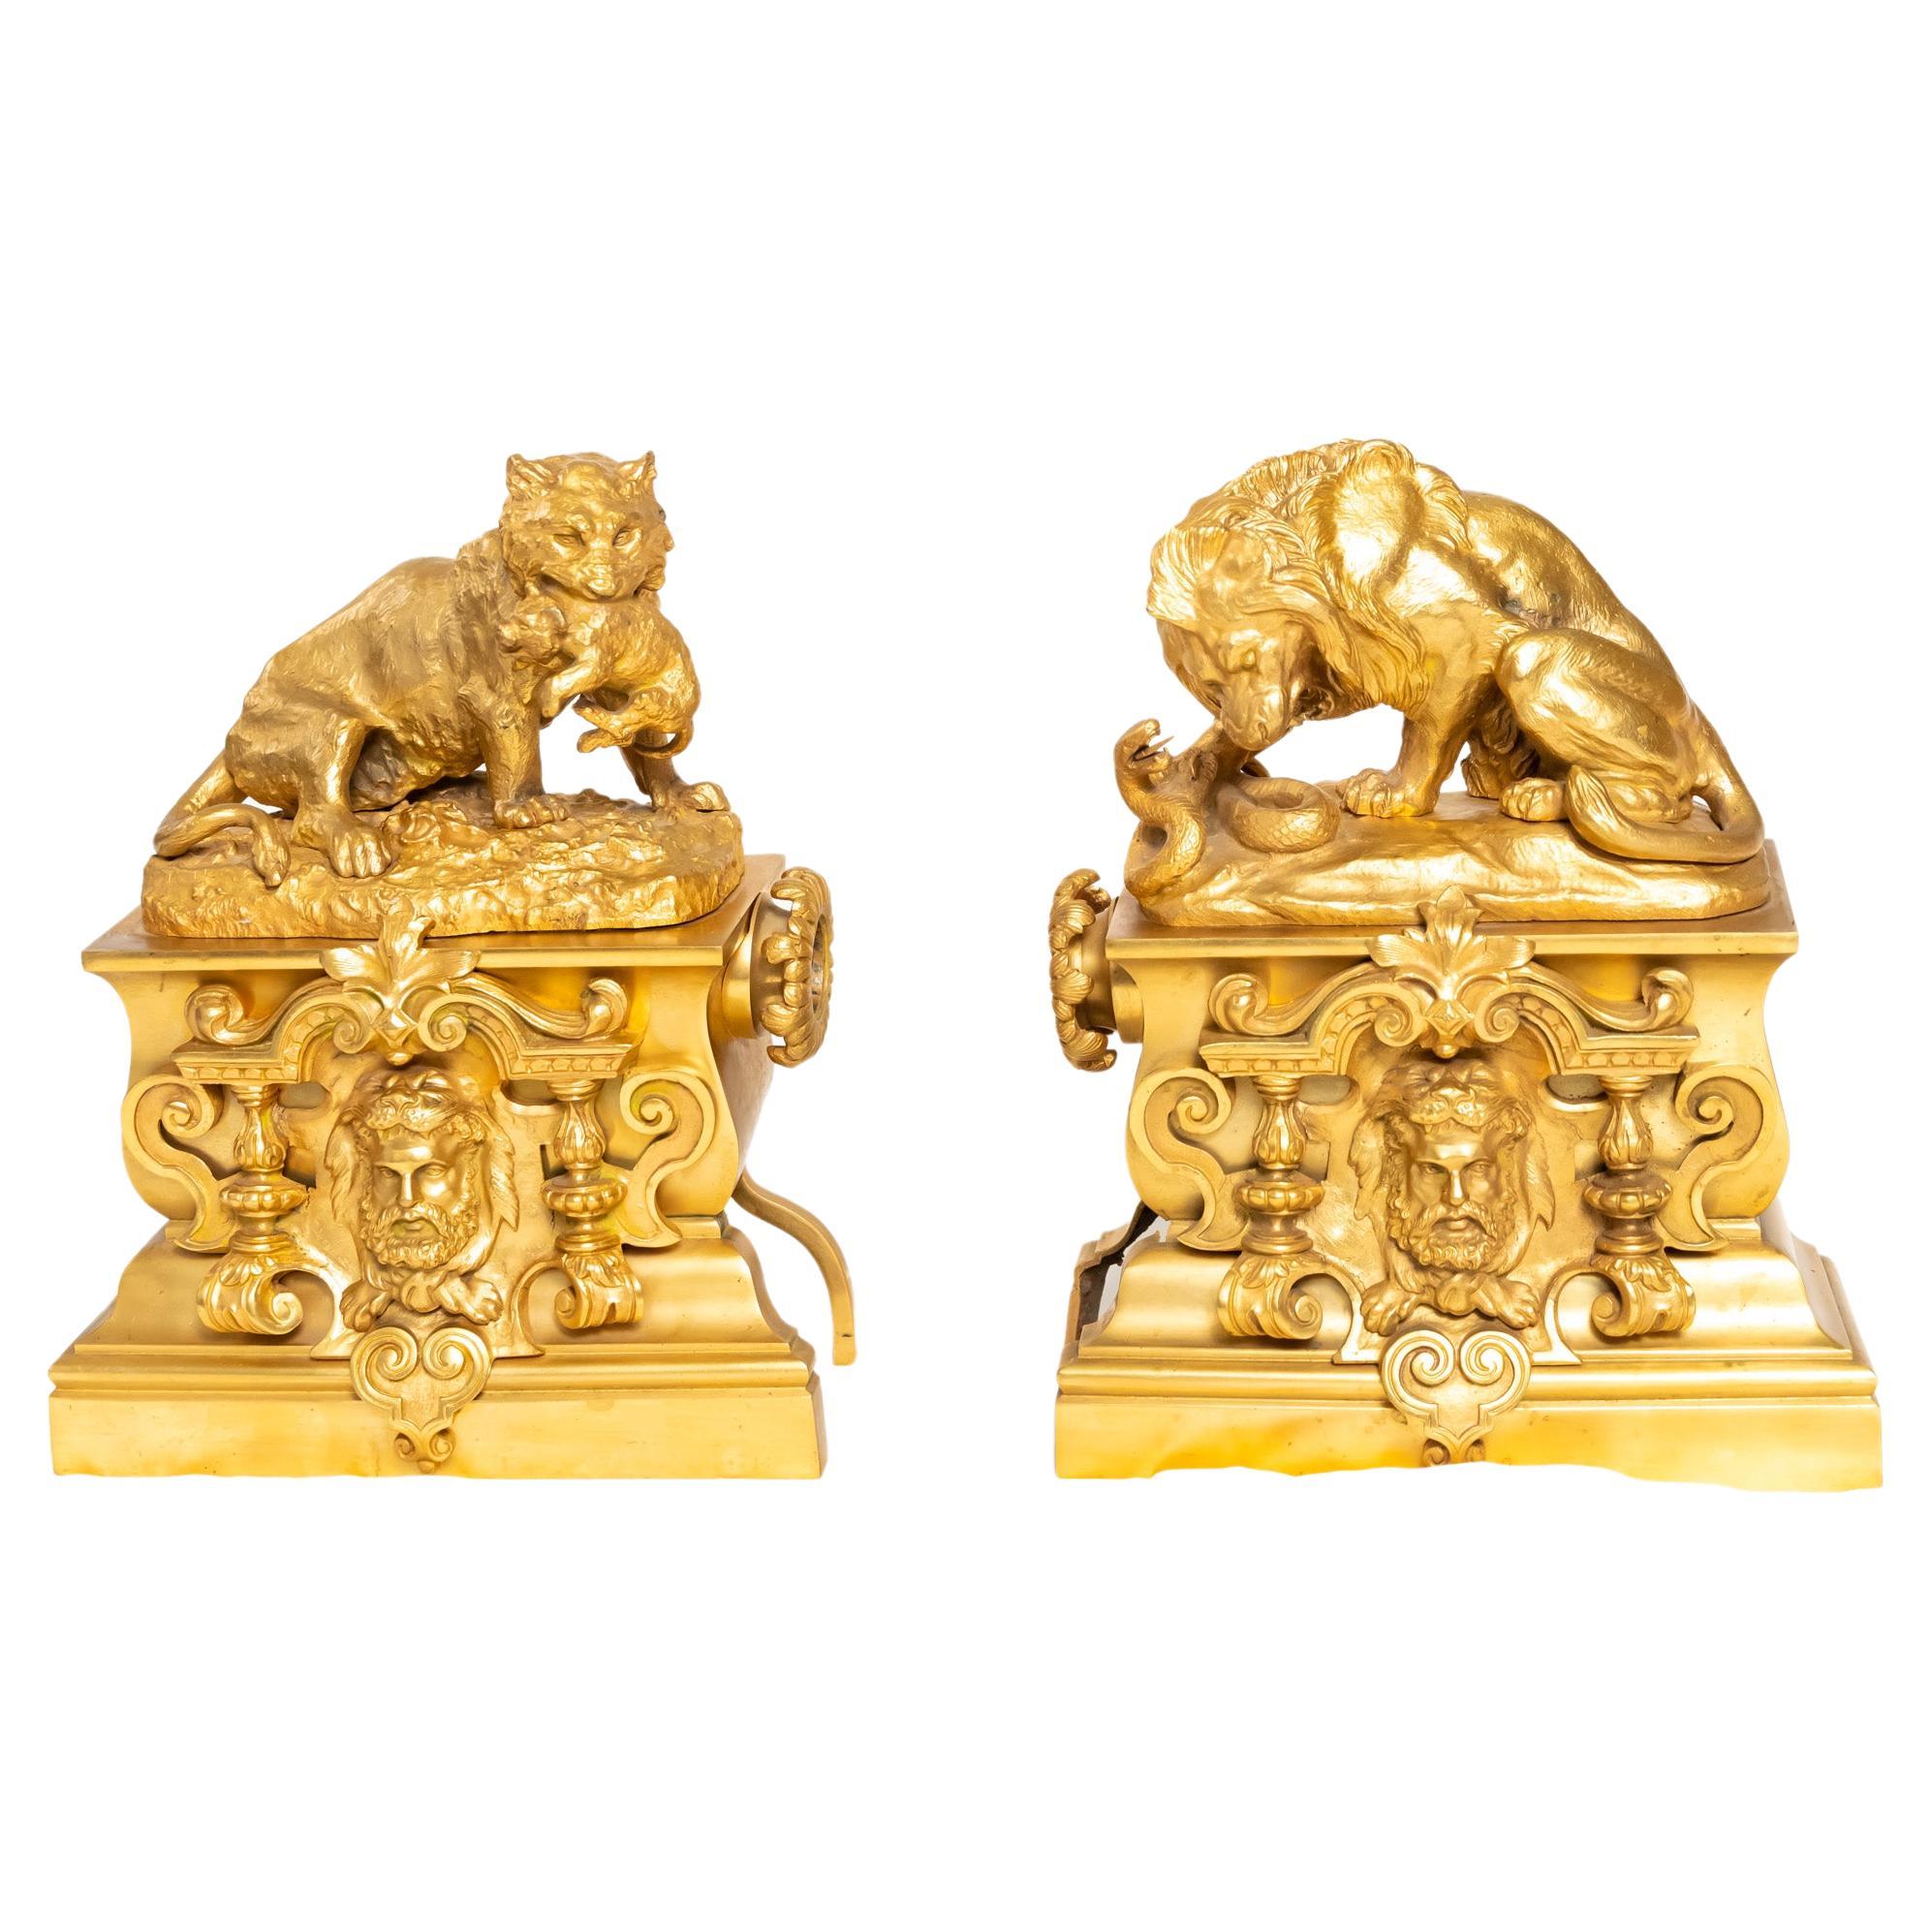 A Pair of Louis Philippe Era Animalier Chenets